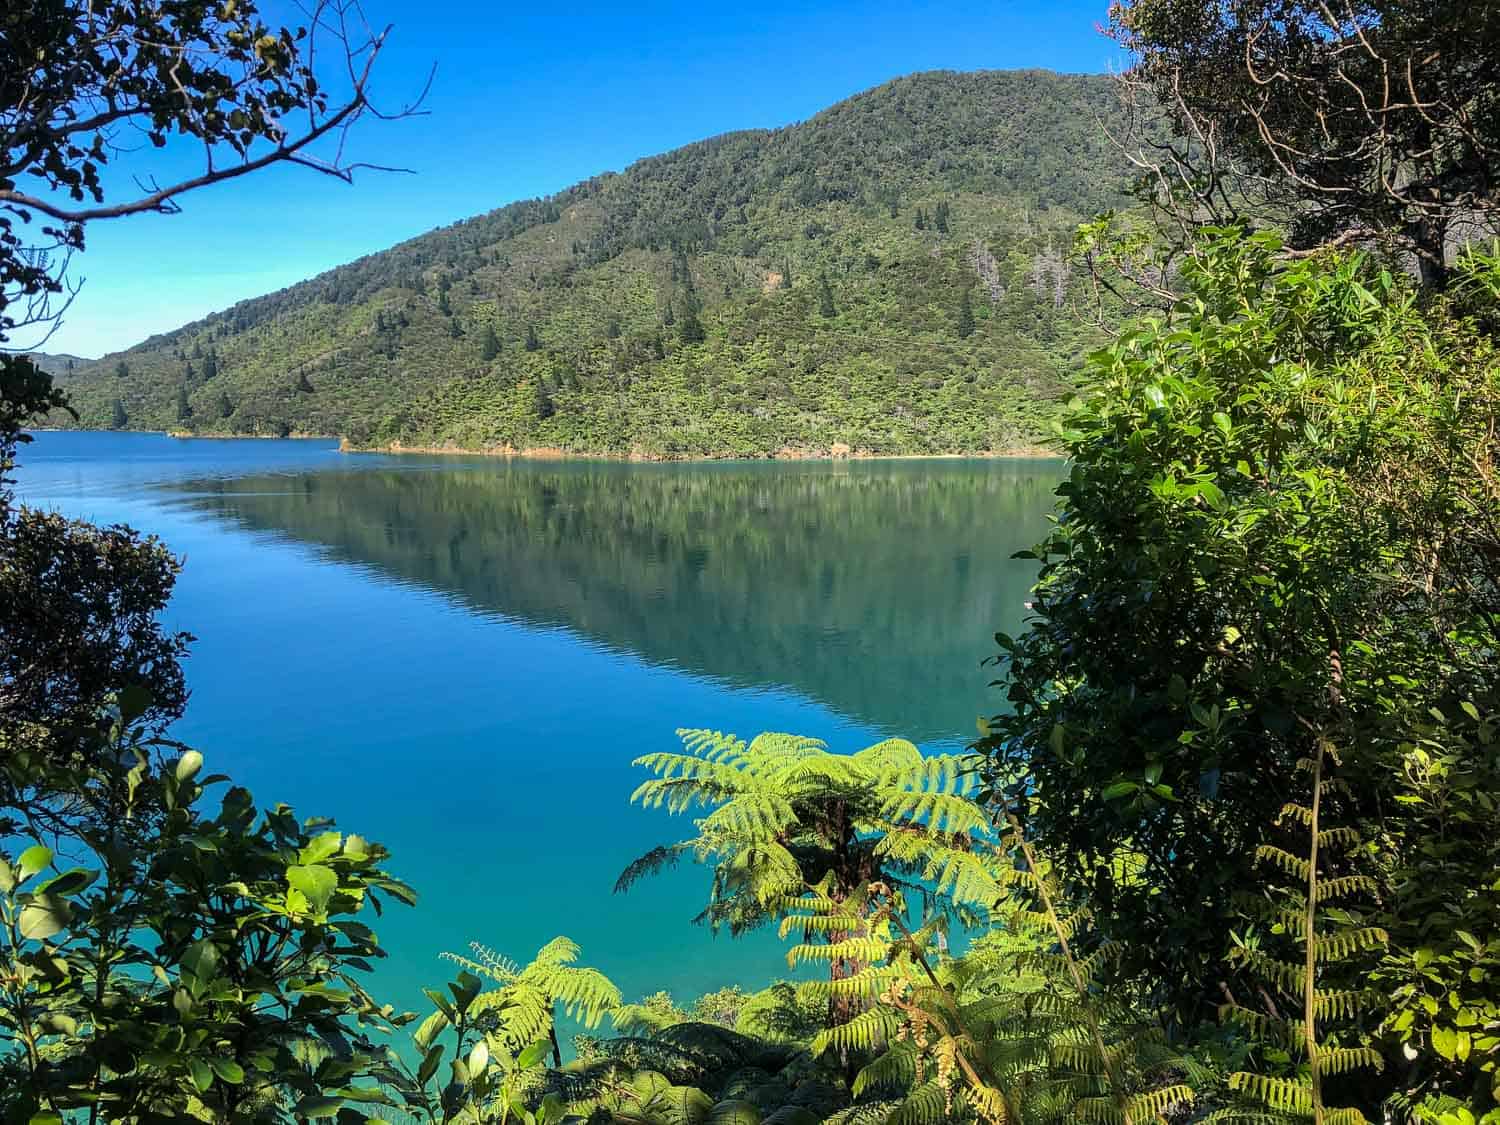 View on Day 2 of the Queen Charlotte Track